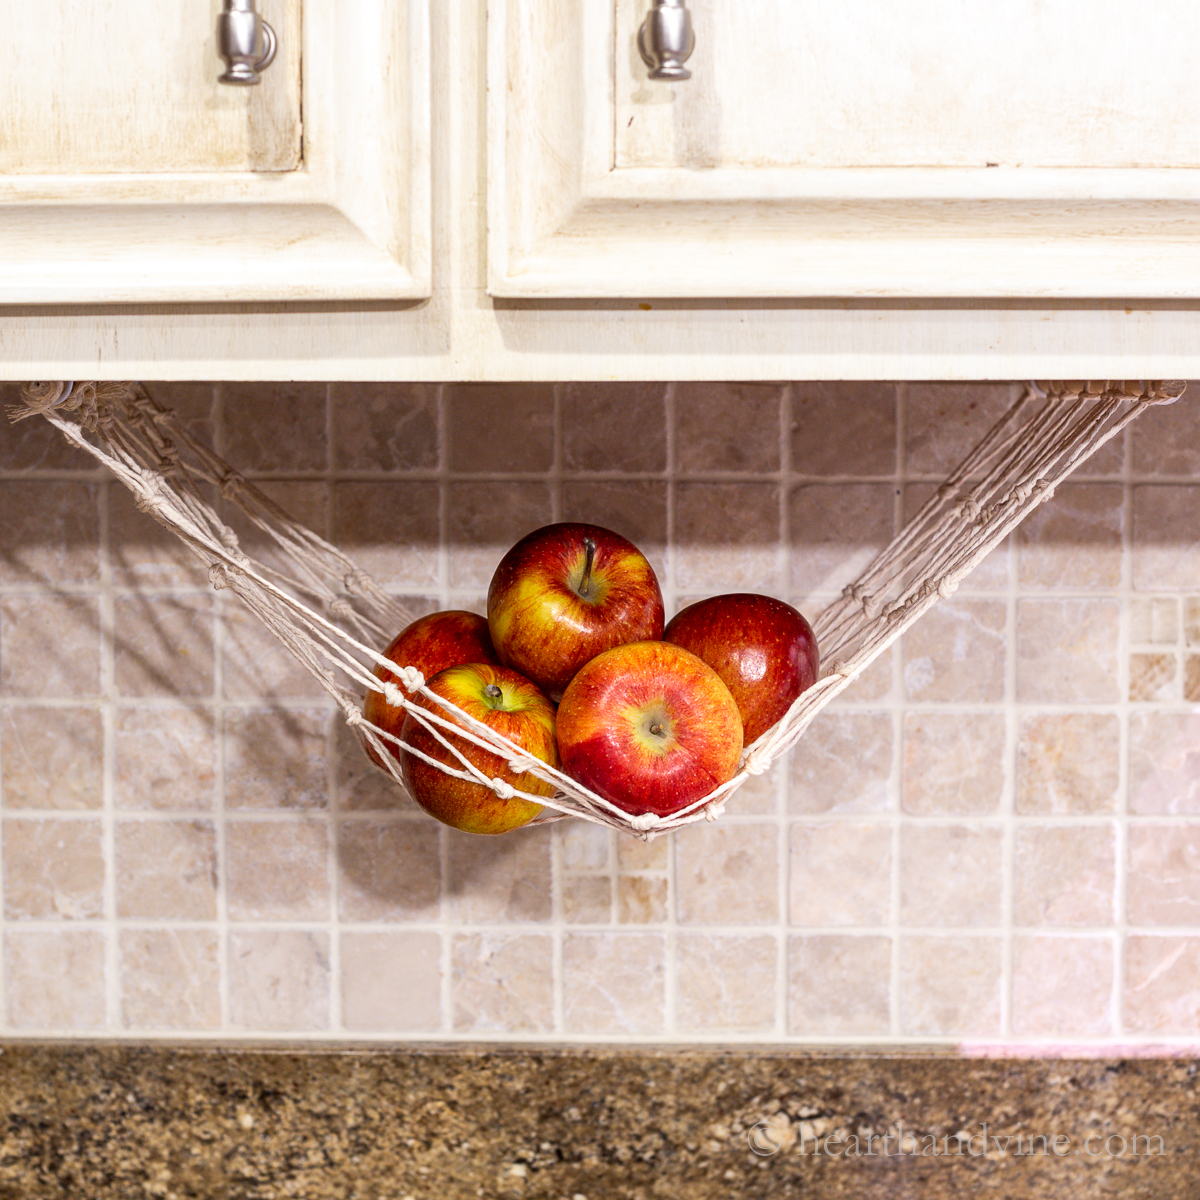 Apples in a macrame hammock under the cabinet